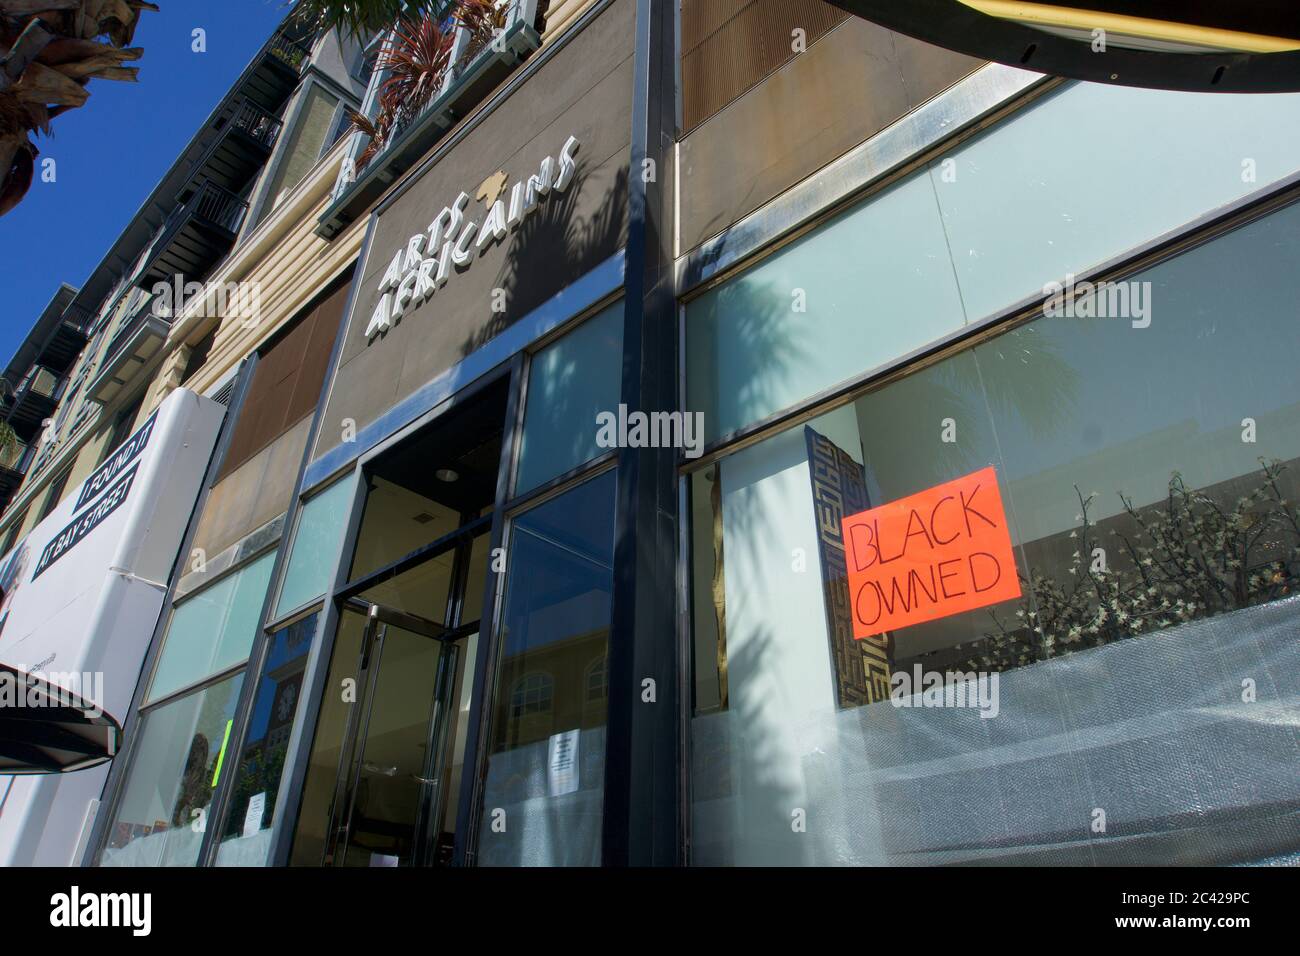 Black owned business with sign in storefront window. The store avoided looting damage after the death of George Floyd and BLM protests. Emeryville, CA Stock Photo